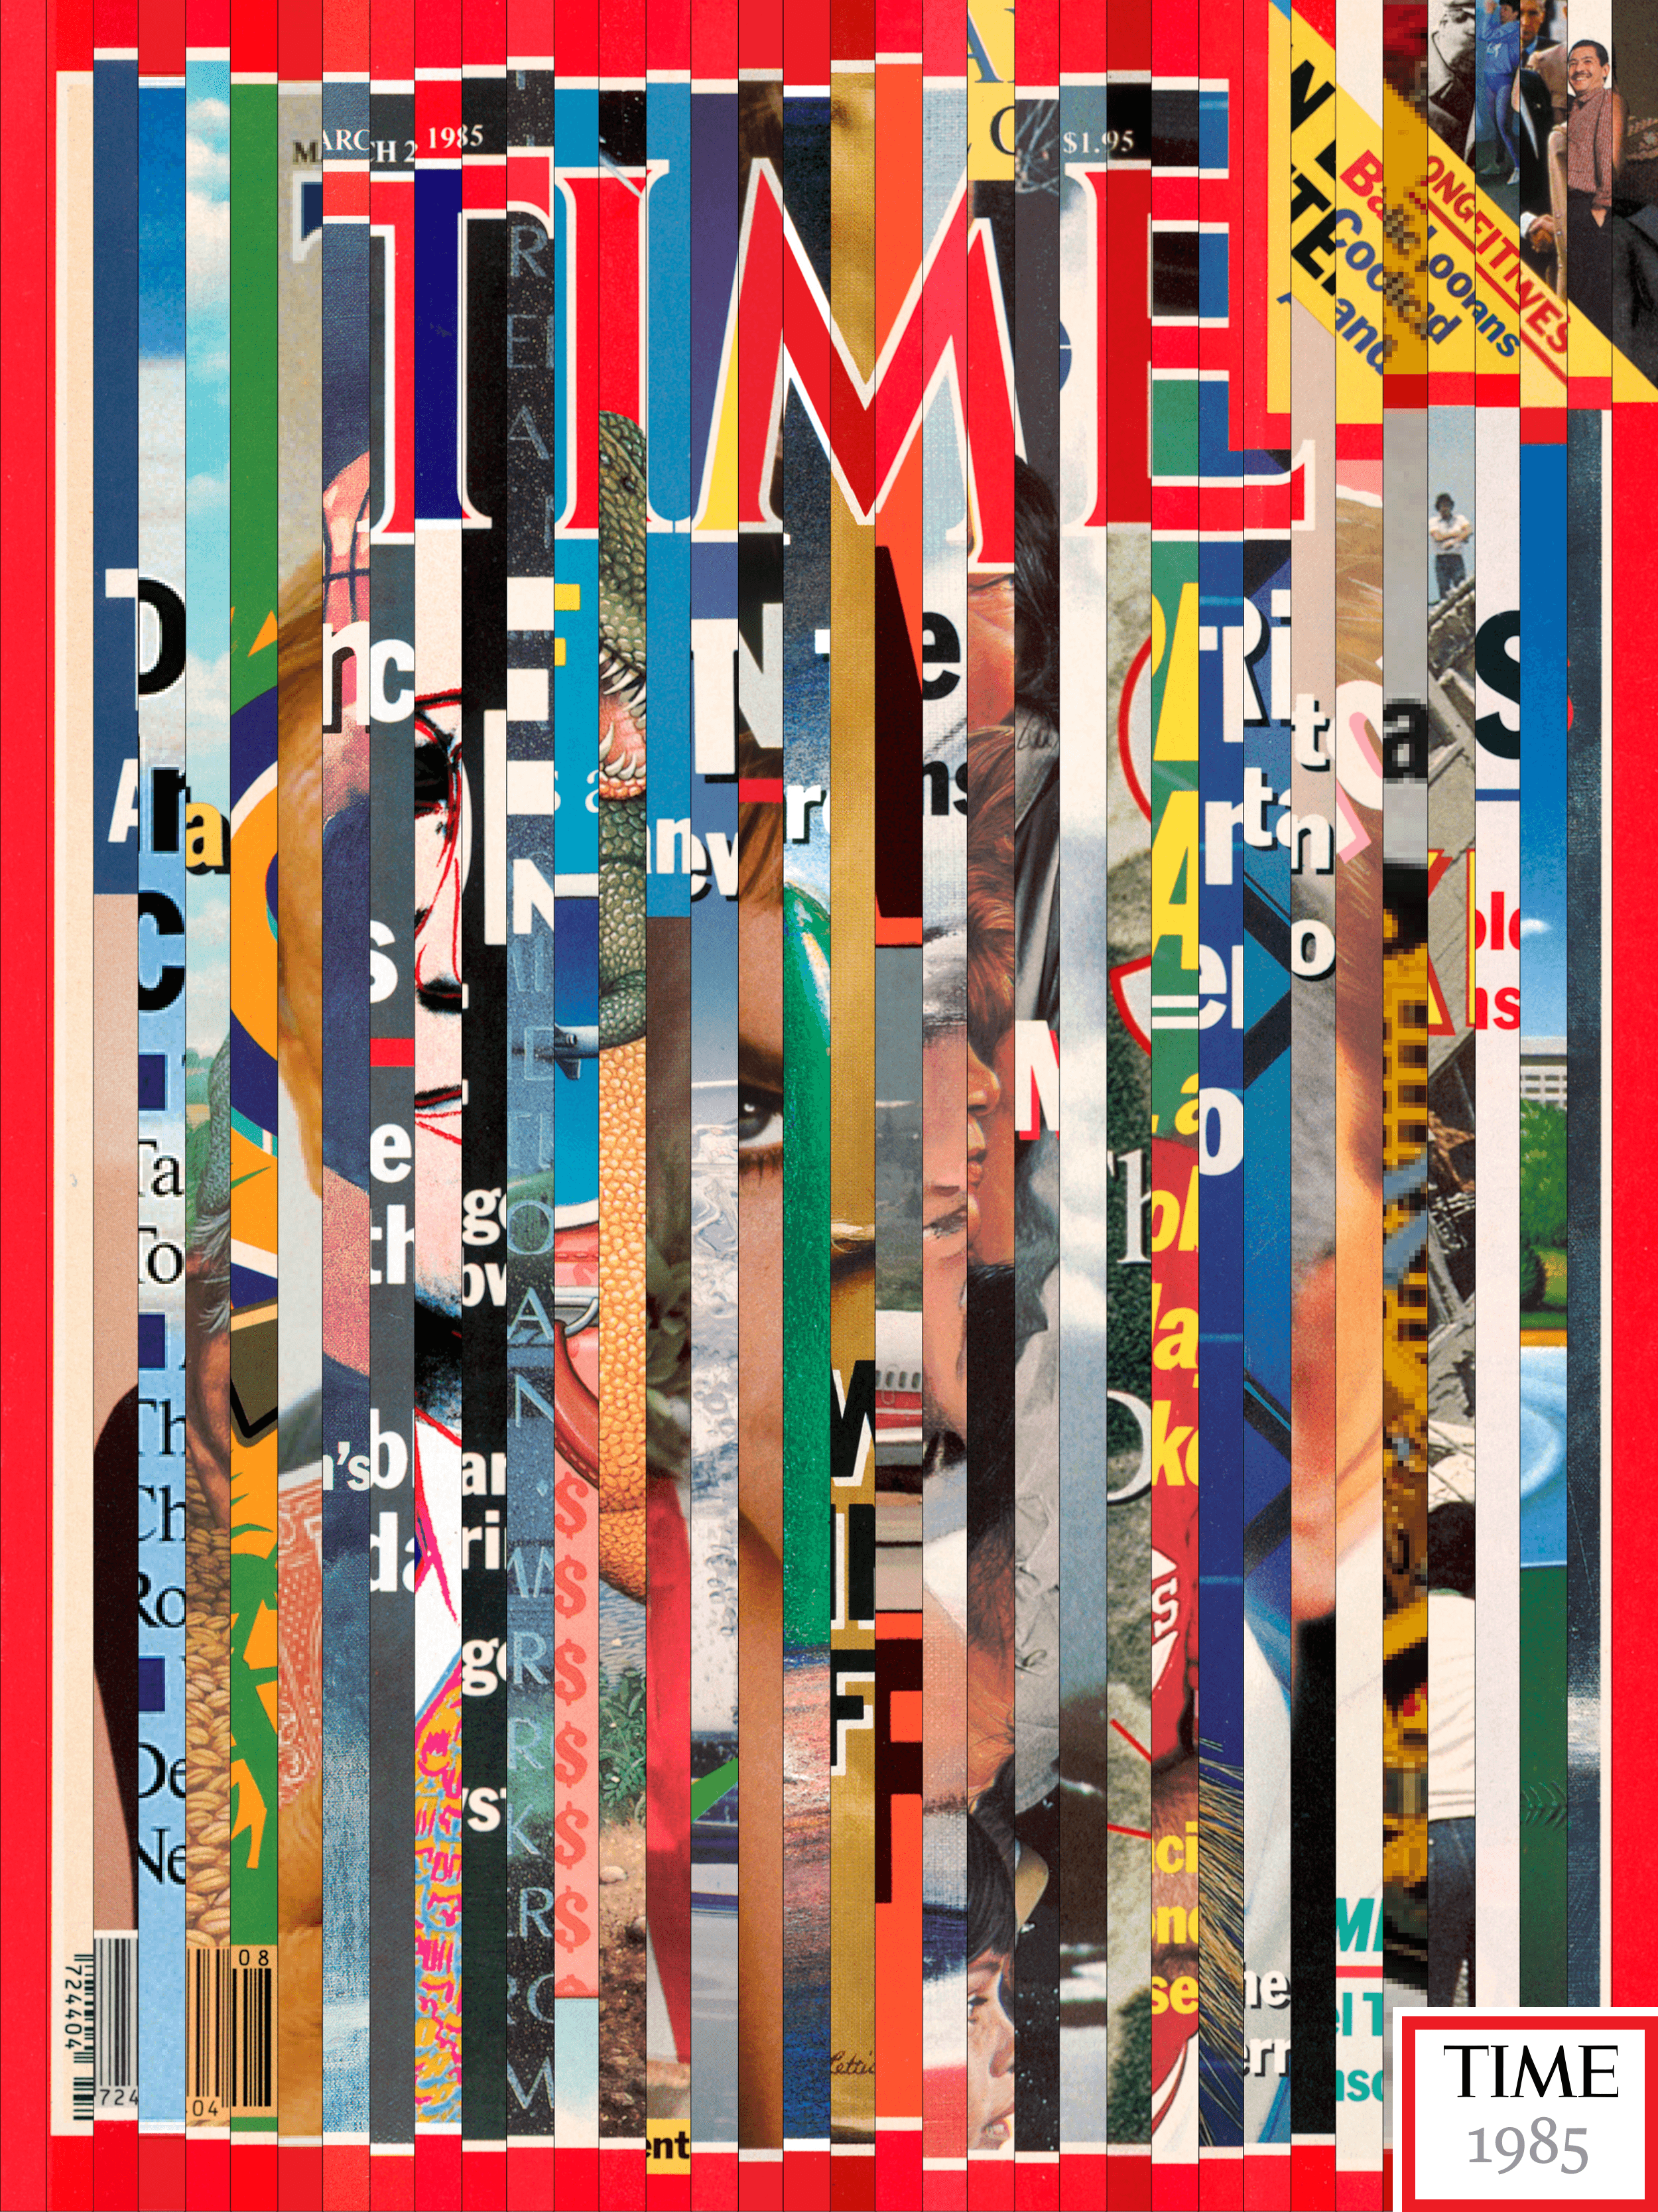 Slice of TIME, 1985 by DW Pine